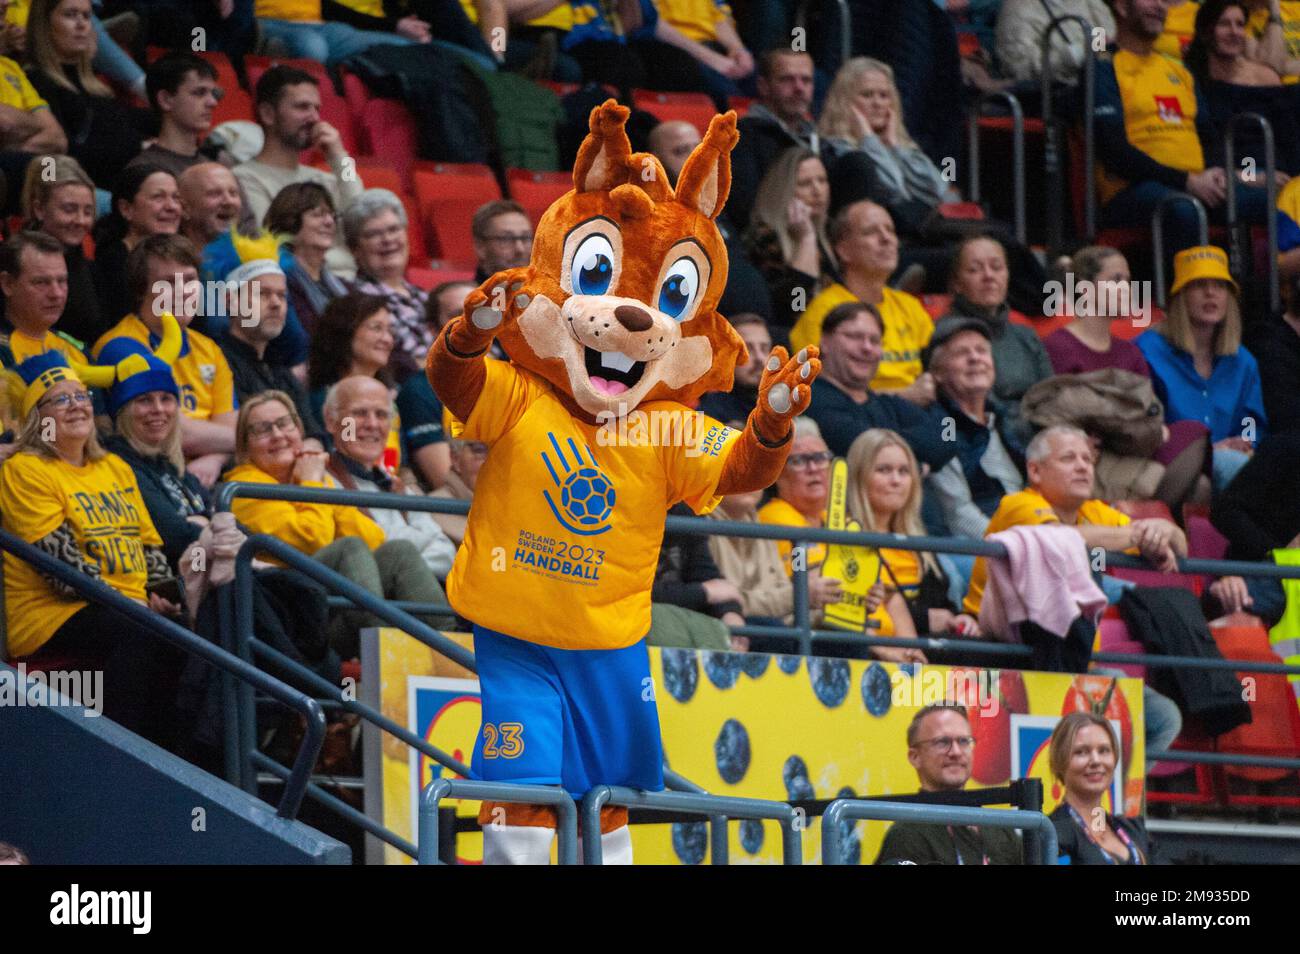 Gothenburg, Sweden. 16th Jan 2023. The official world championship mascot during the 2023 IHF World Men’s Handball Championship game between Uruguay and Sweden on January 16th, 2023 in Gothenburg. Credit: Oskar Olteus / Alamy Live News Stock Photo